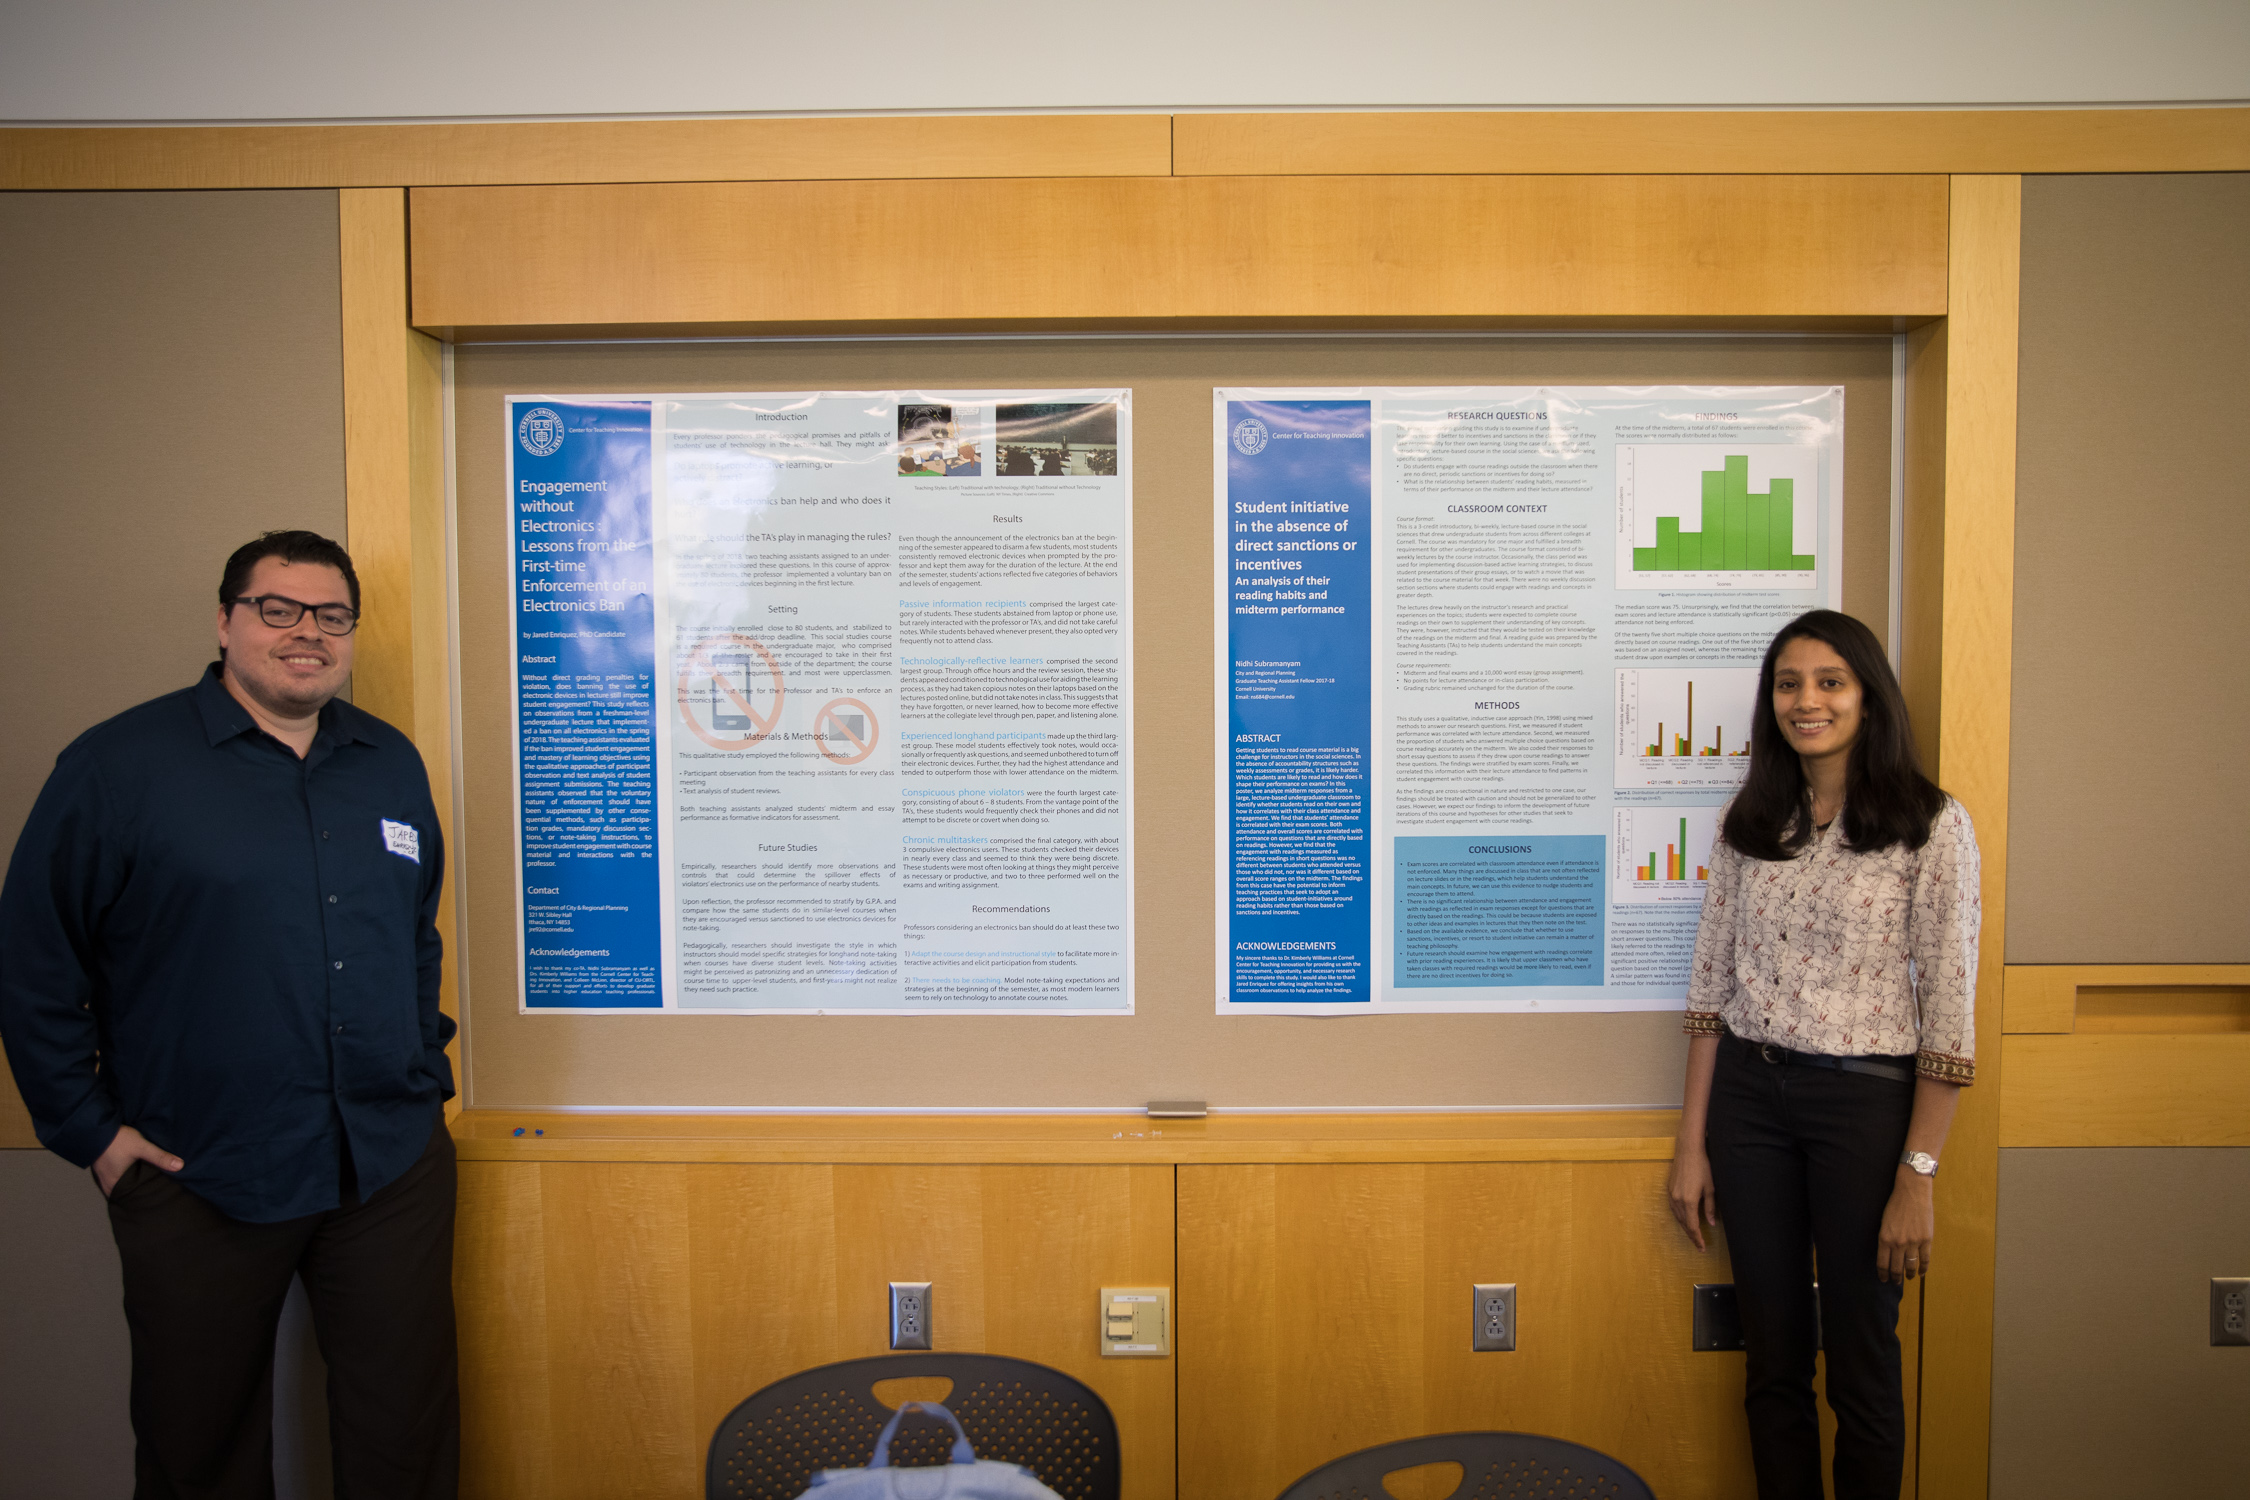 Jared Enriquez and Nidhi Subramanyam present research on teaching in 2018